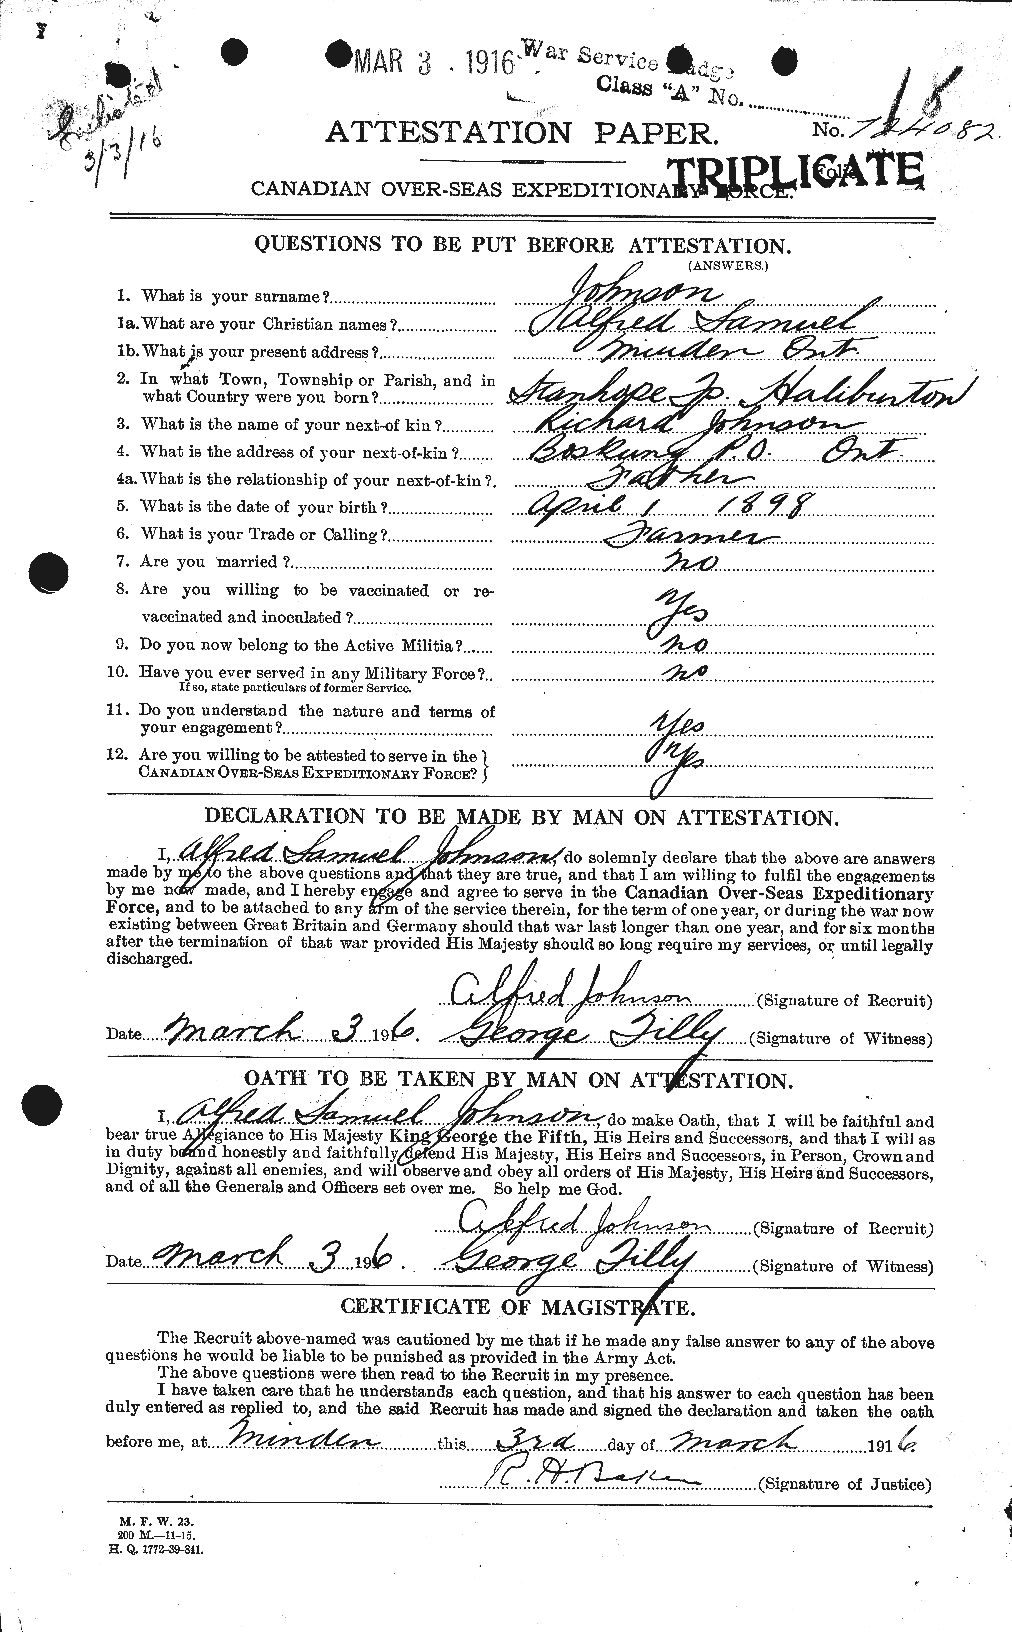 Personnel Records of the First World War - CEF 421192a